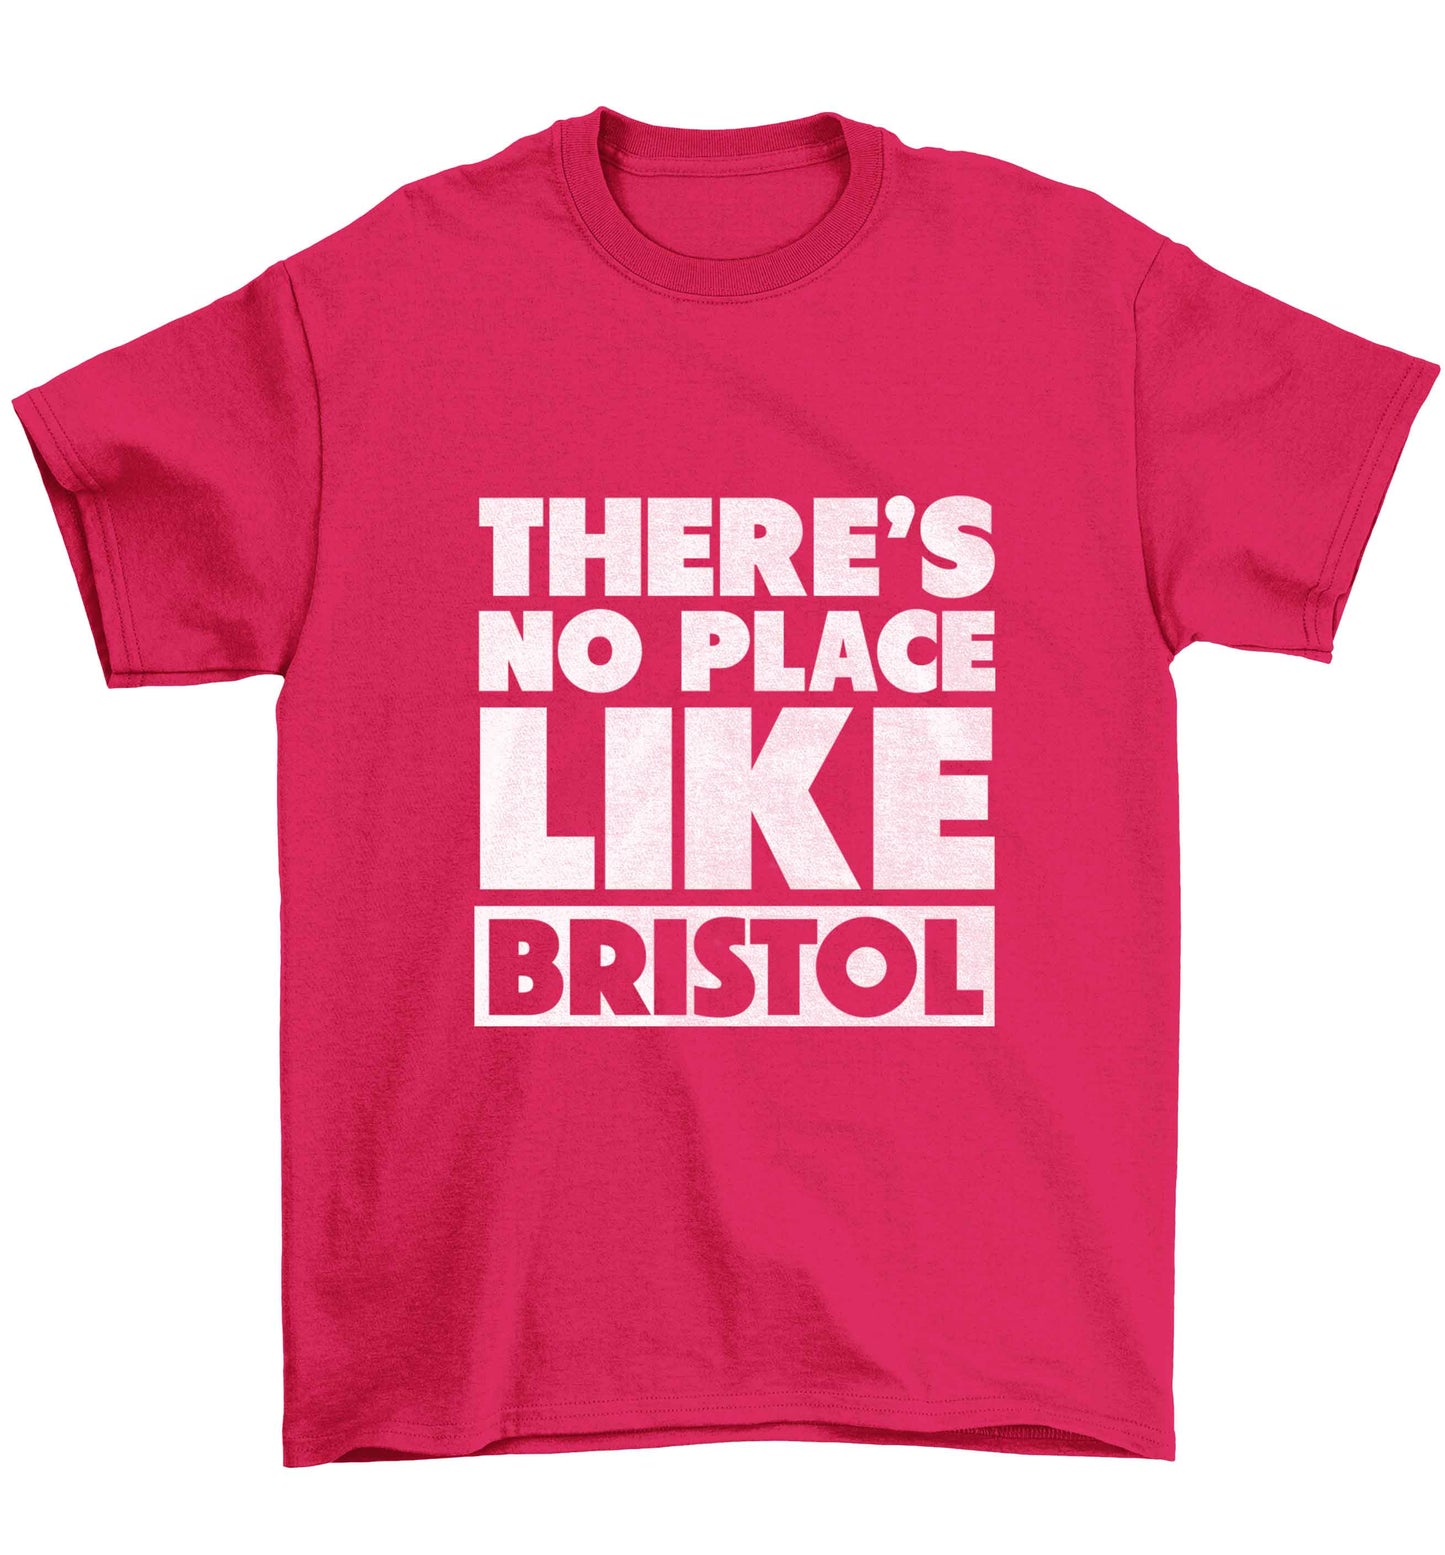 There's no place like Bristol Children's pink Tshirt 12-13 Years